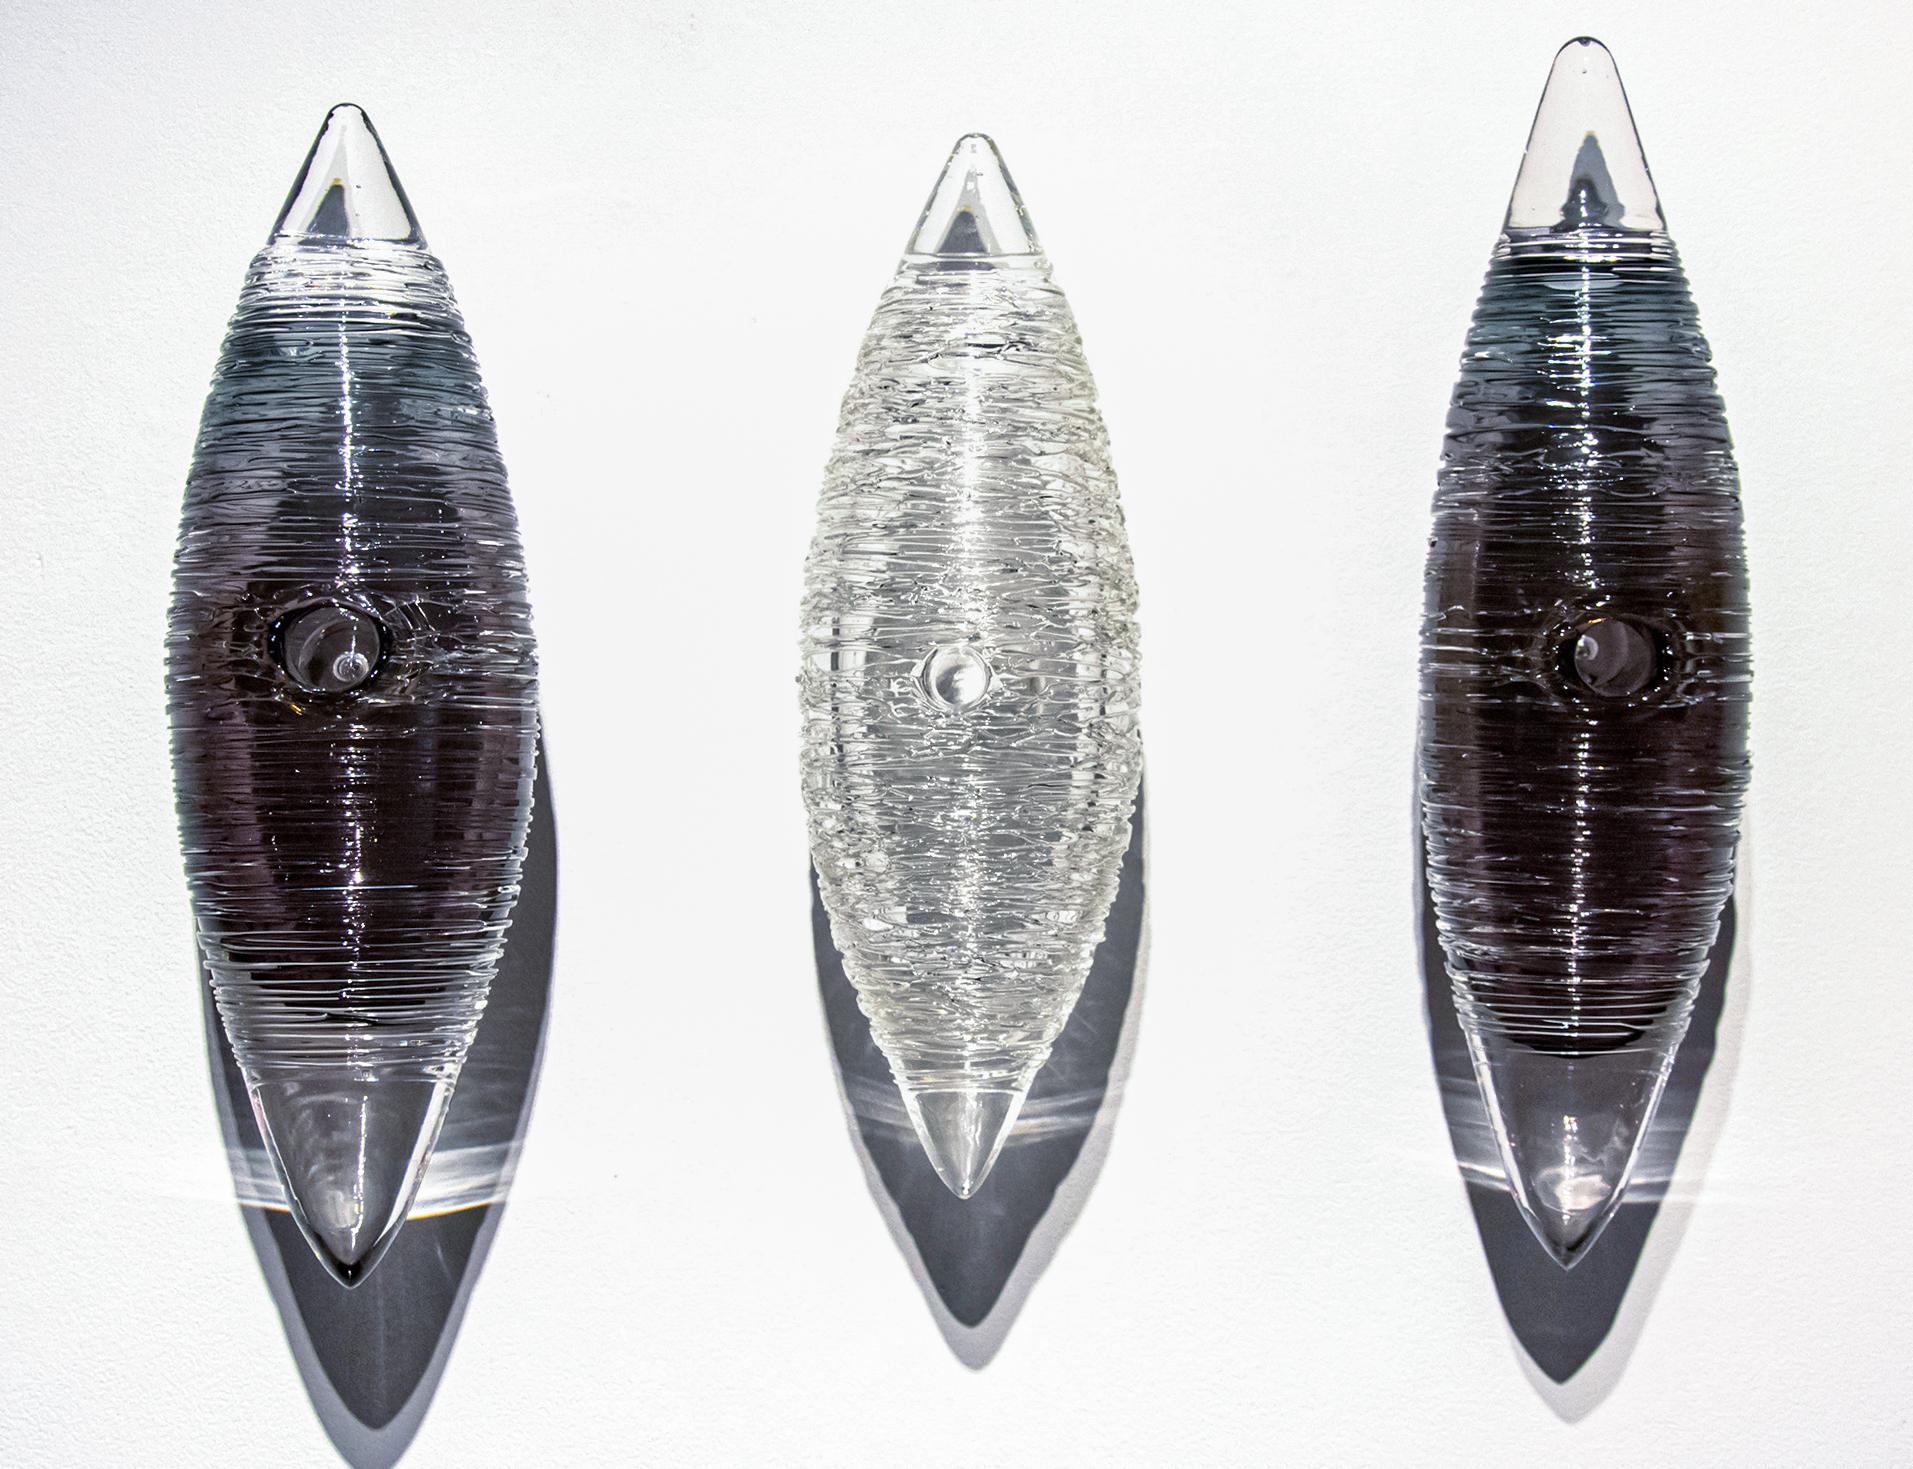 Cocoon Series Smoky Grey and White - textured, translucent, glass wall sculpture